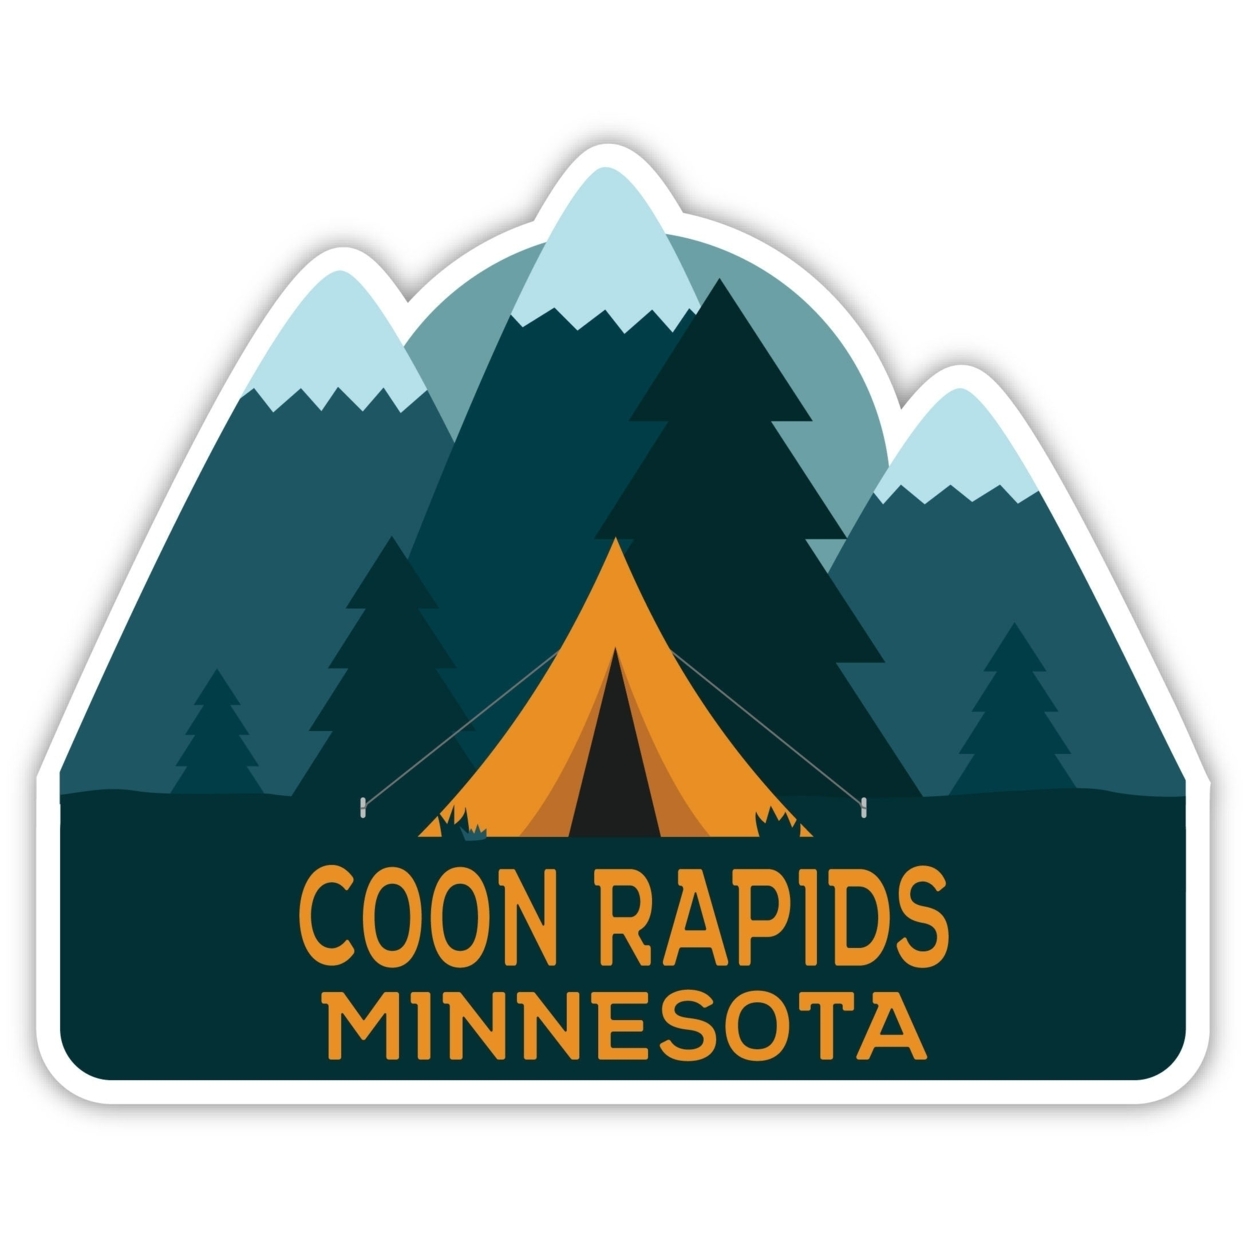 Coon Rapids Minnesota Souvenir Decorative Stickers (Choose Theme And Size) - 4-Pack, 4-Inch, Bear